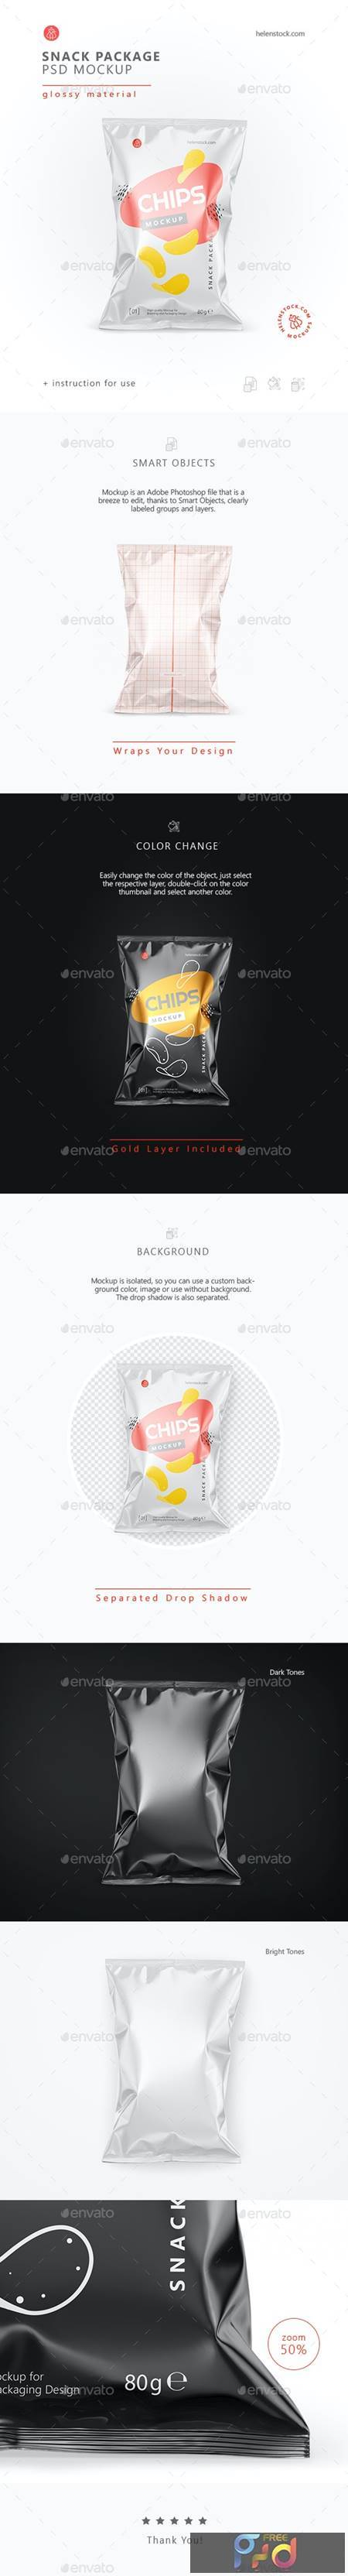 Glossy Snack Package Mockup - Front View 26538212 1